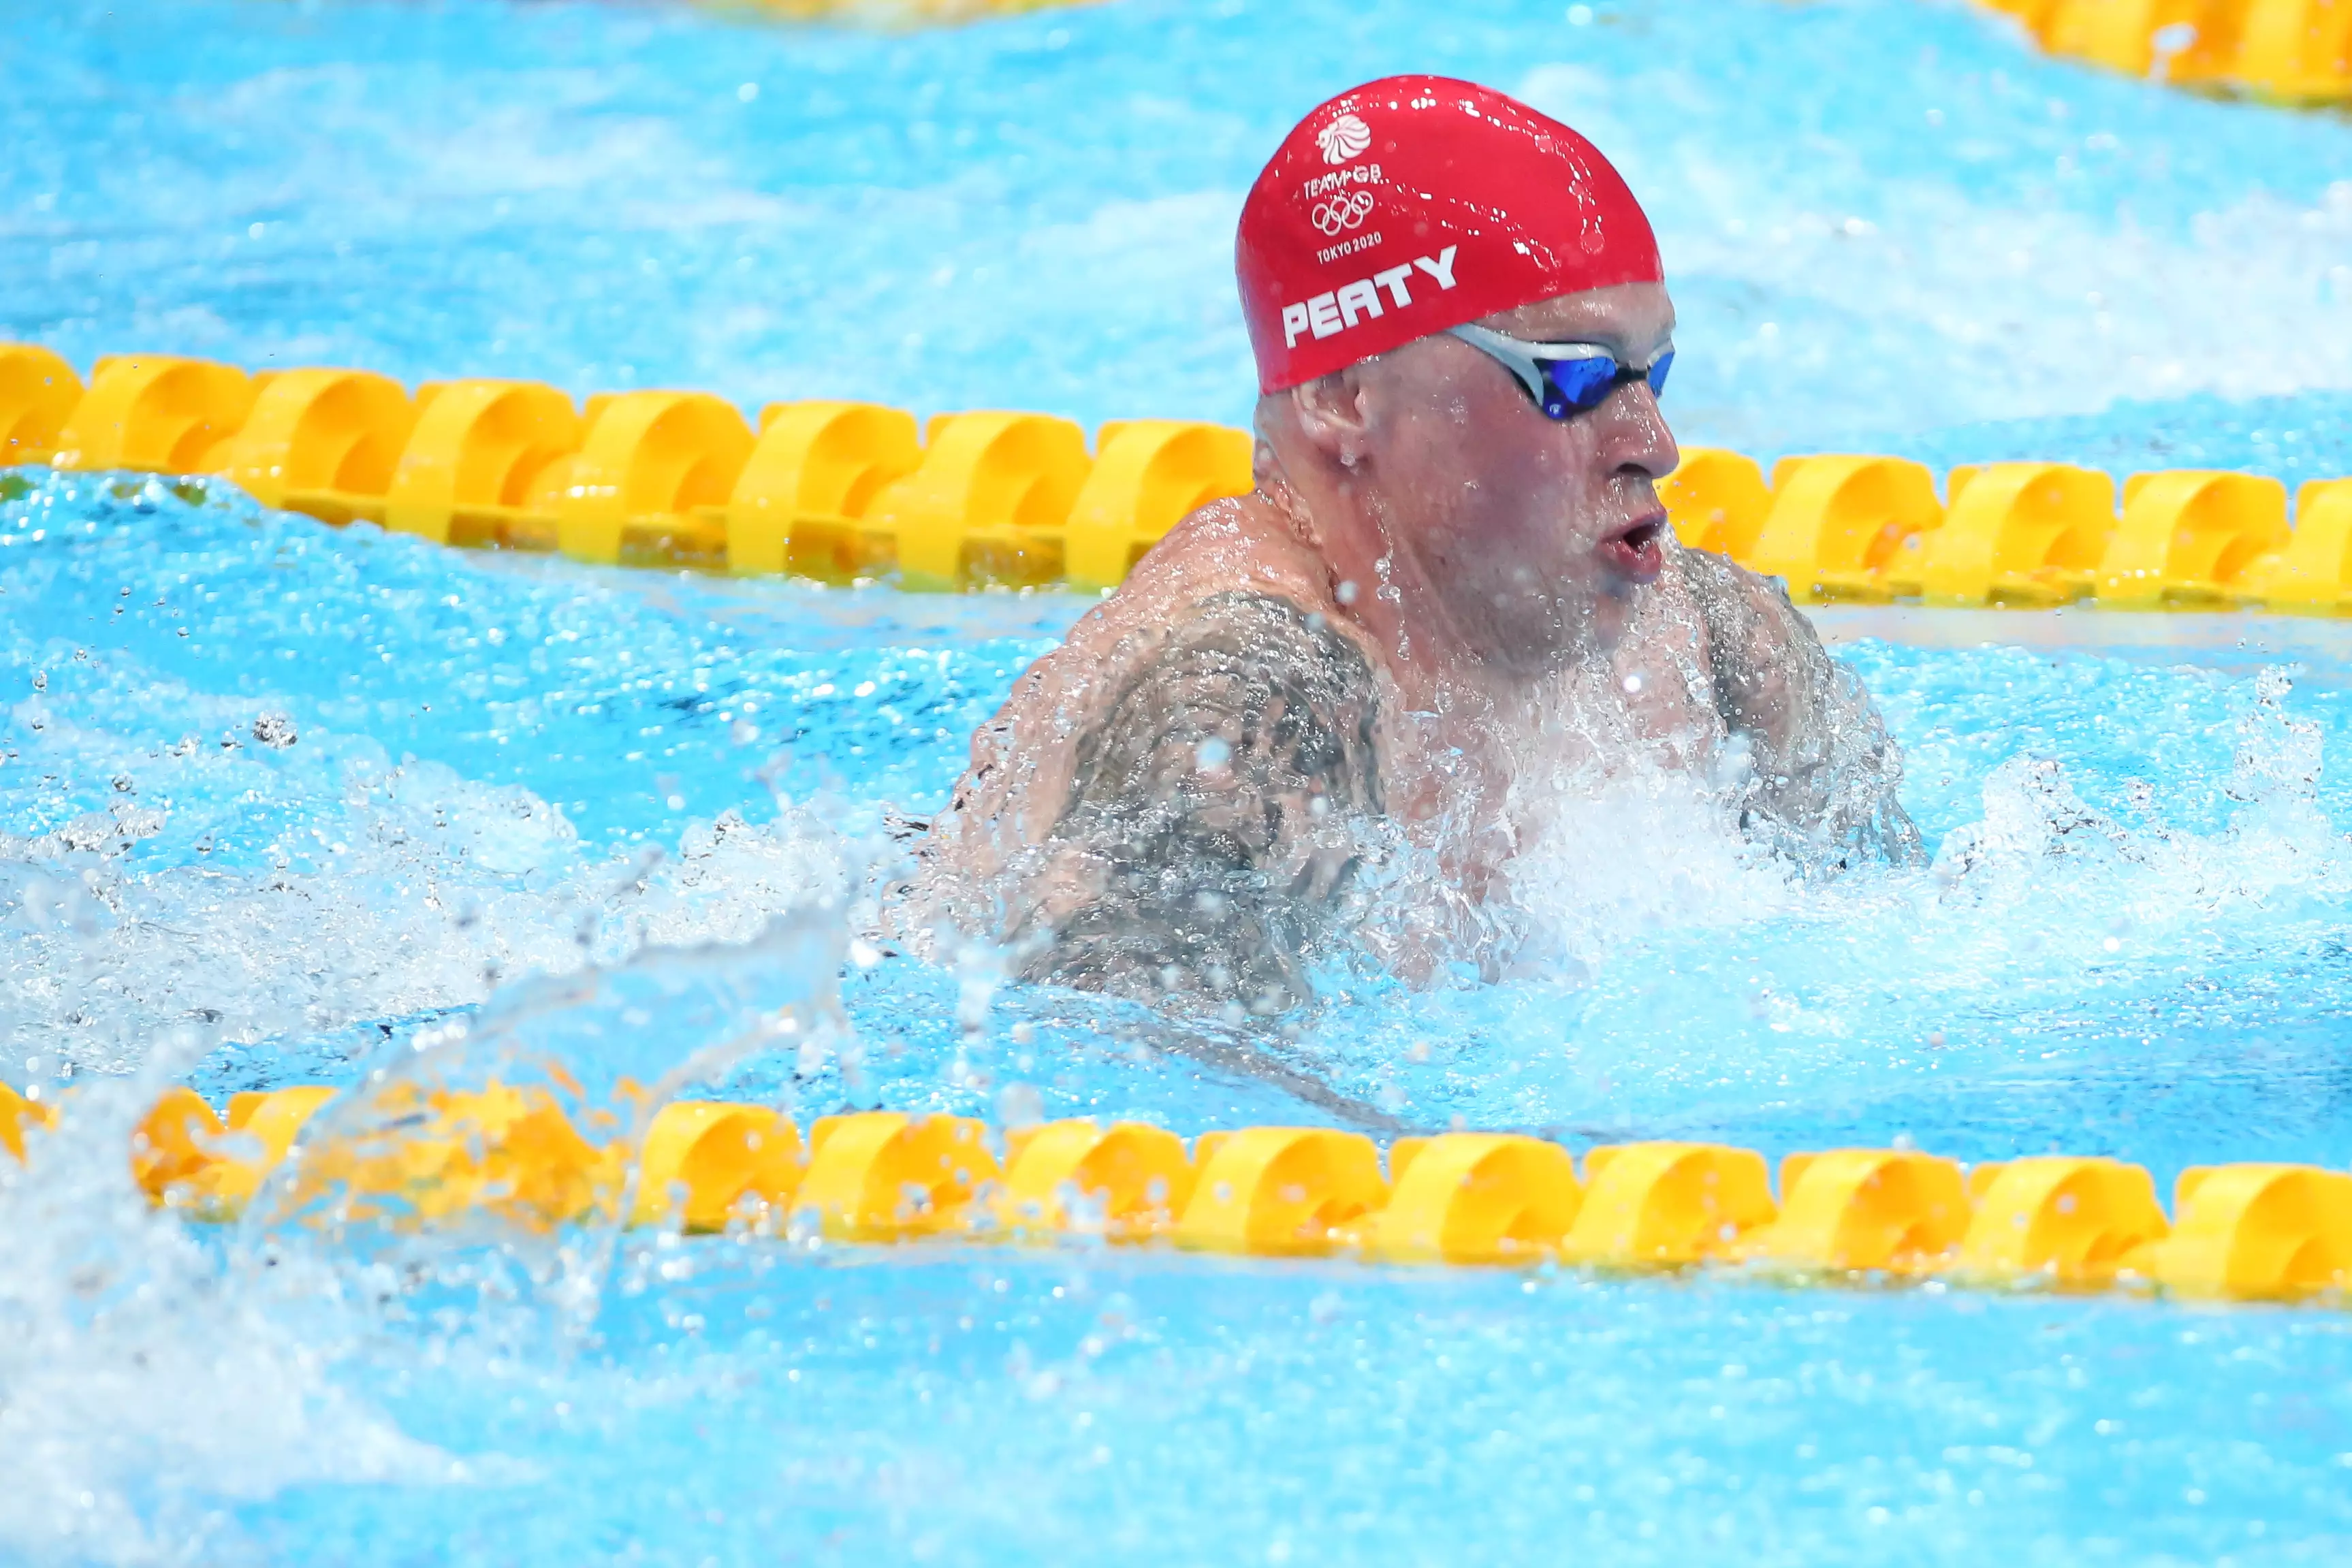 Adam Peaty competing in the men's 100m breaststroke at the Tokyo 2020 Olympics (